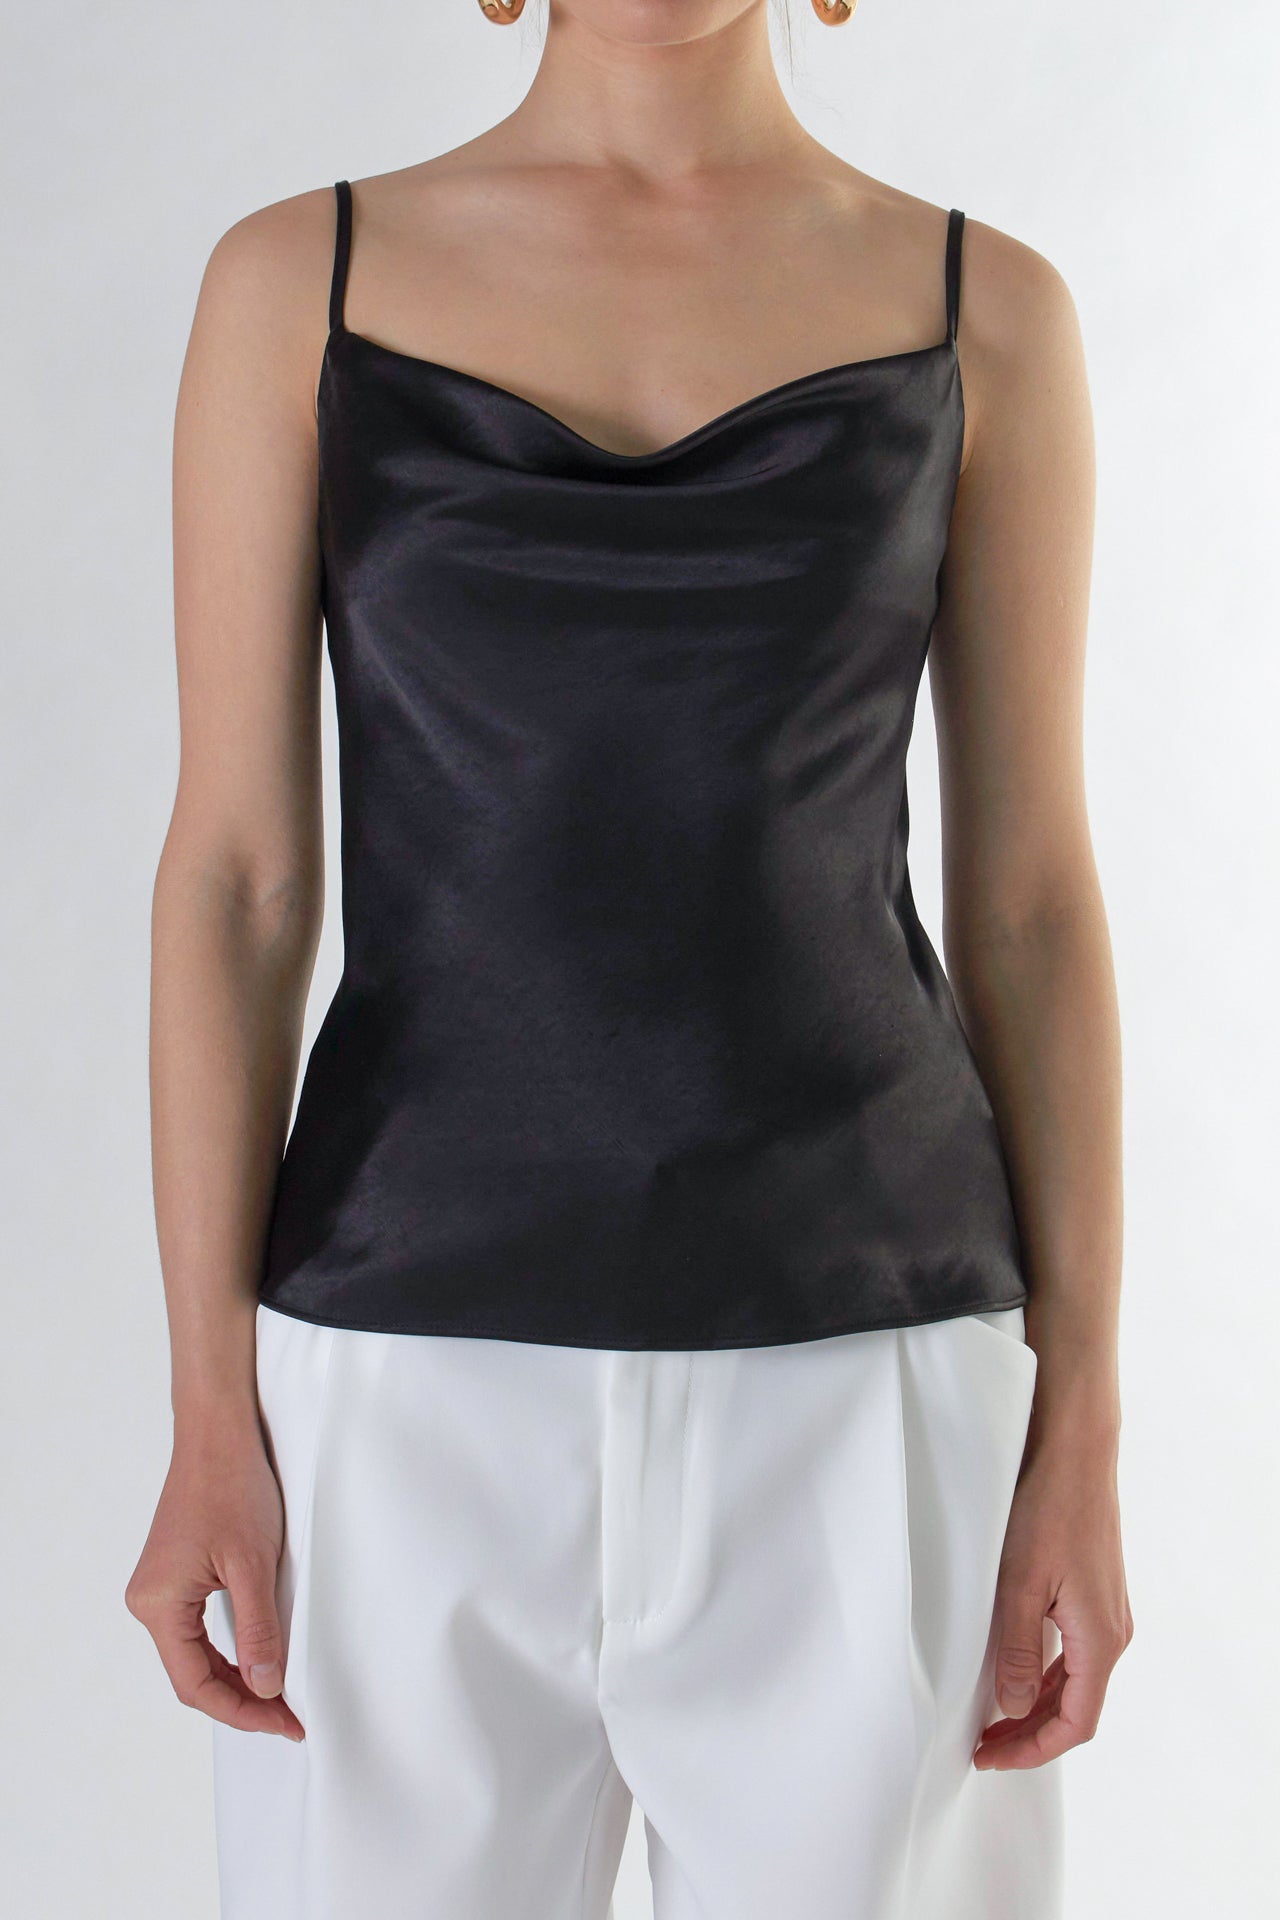 Endless Rose - Satin Cowl Neck Top - Tops in Women's Clothing available at endlessrose.com